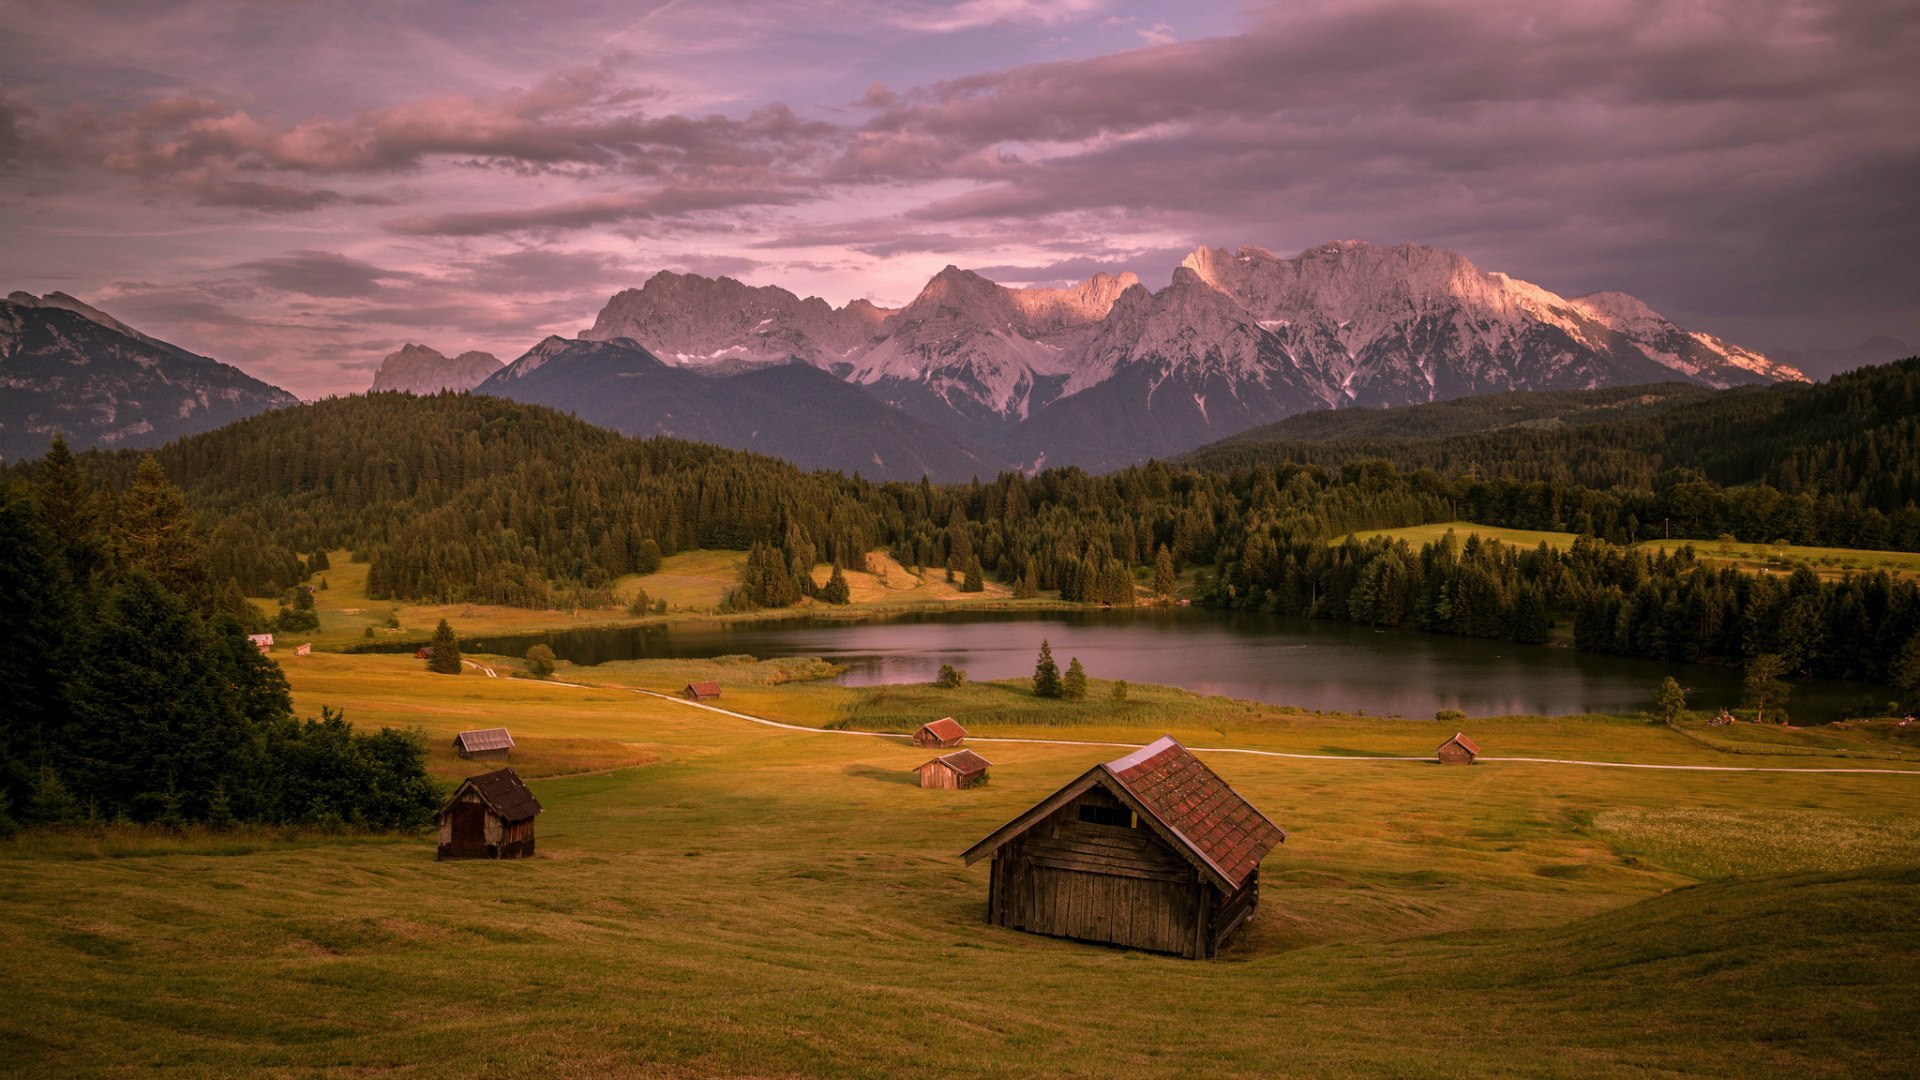 Bavarian Alps, Germany wallpapers and images - wallpapers, pictures, photos